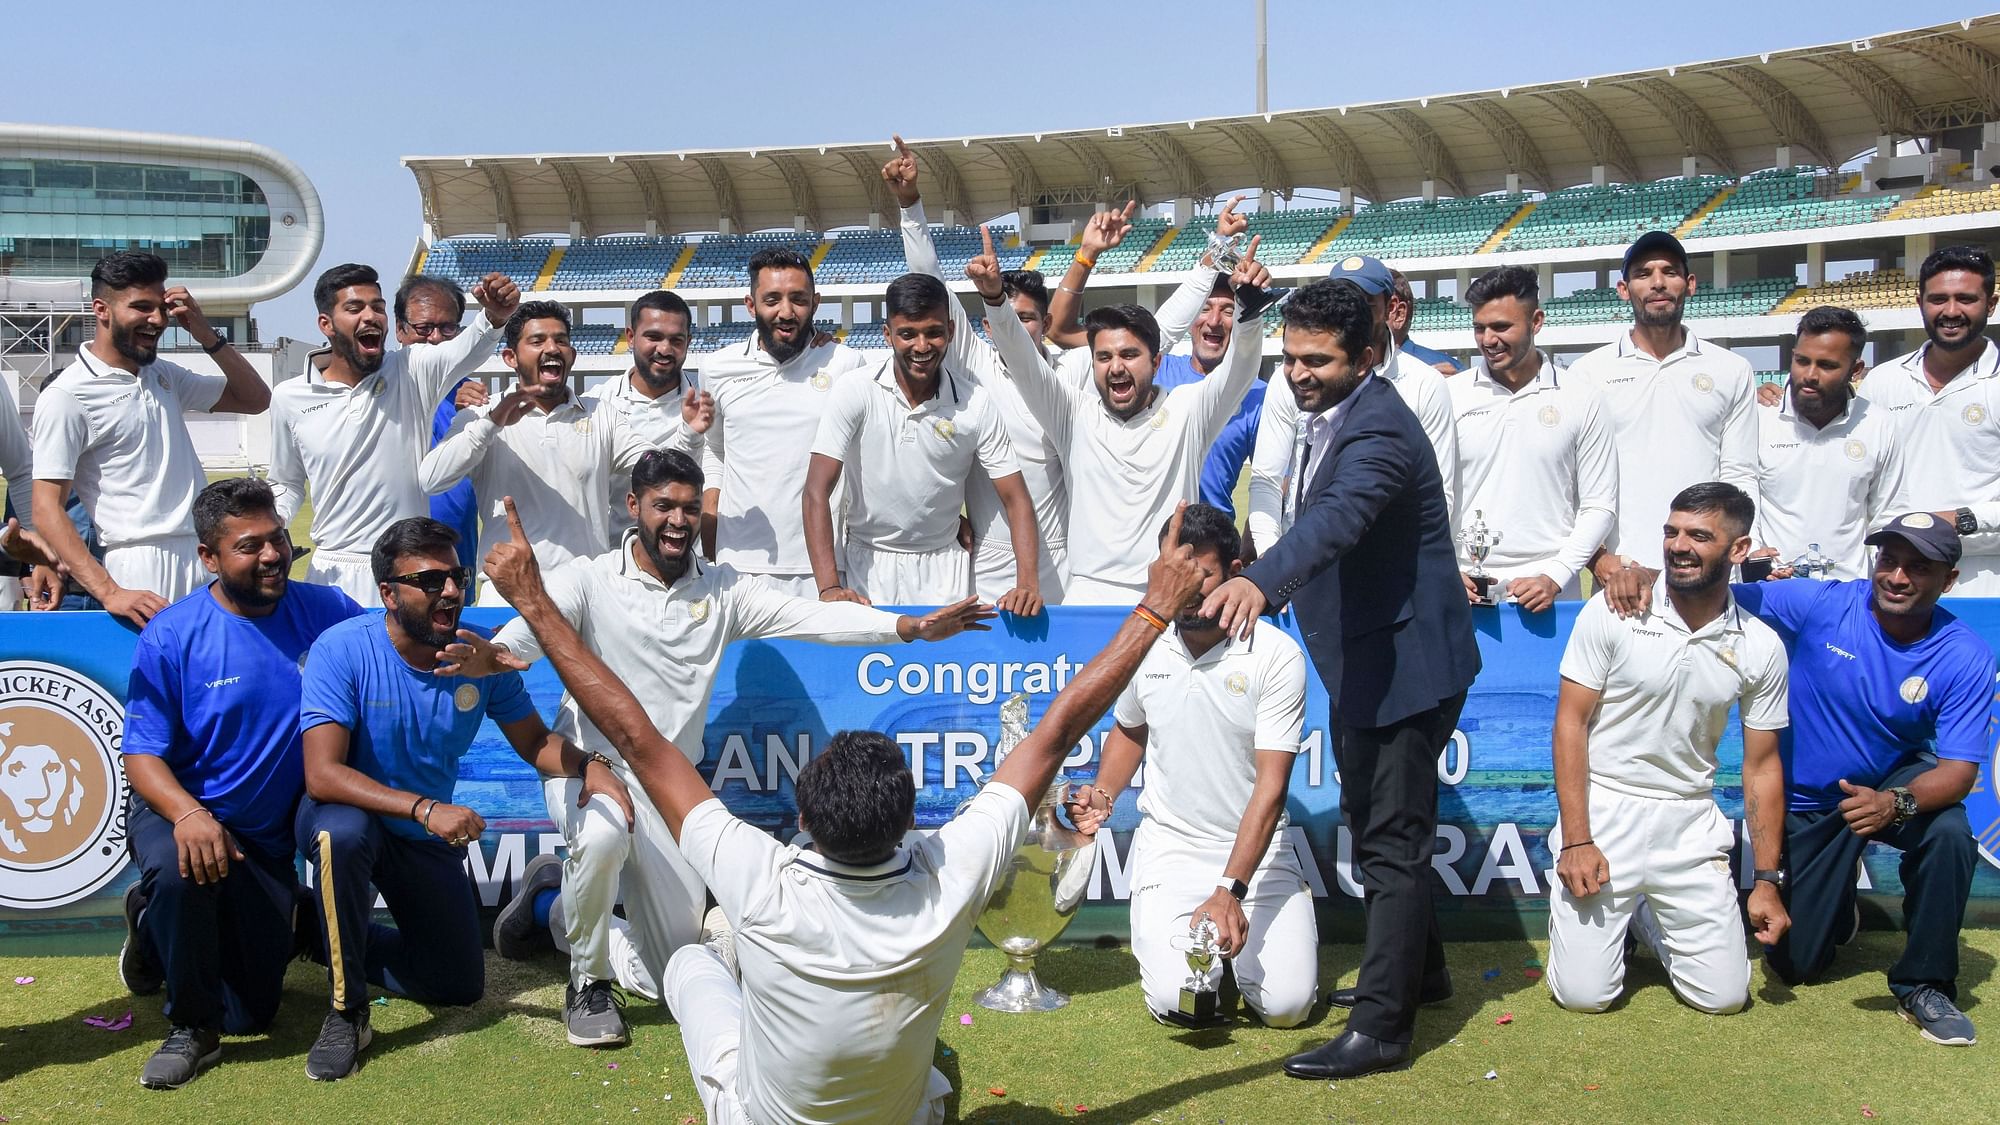 Saurashtra are the defending champions of the Ranji Trophy which they won earlier this year in March beating Bengal in the final.